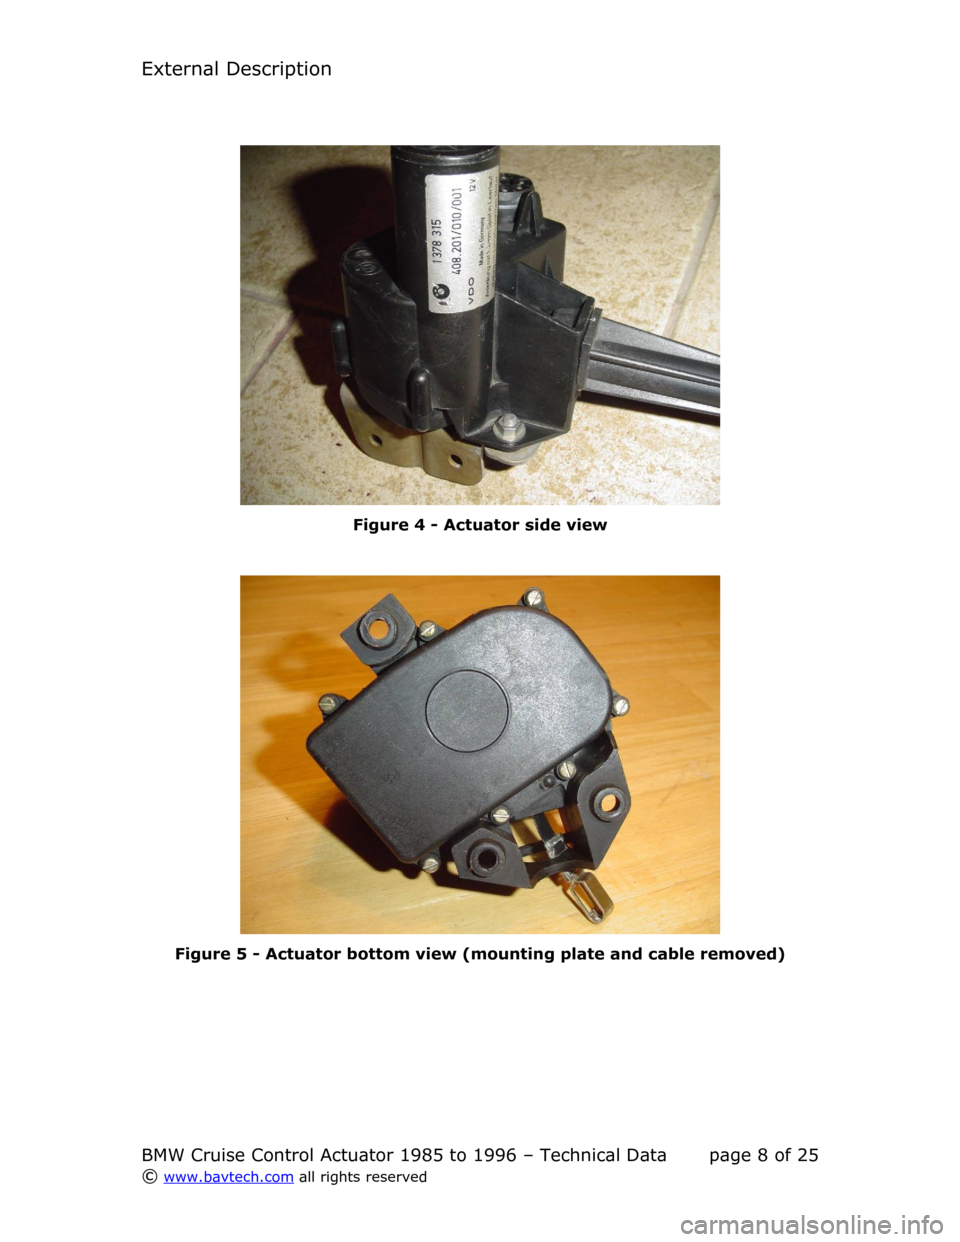 BMW 5 SERIES 1987 E34 Cruise Control Acutator External Description
Figure  4  - Actuator side view
Figure  5  - Actuator bottom view (mounting plate and cable removed)
BMW Cruise Control Actuator 1985 to 1996 – Technical Data page  8  of  25
©